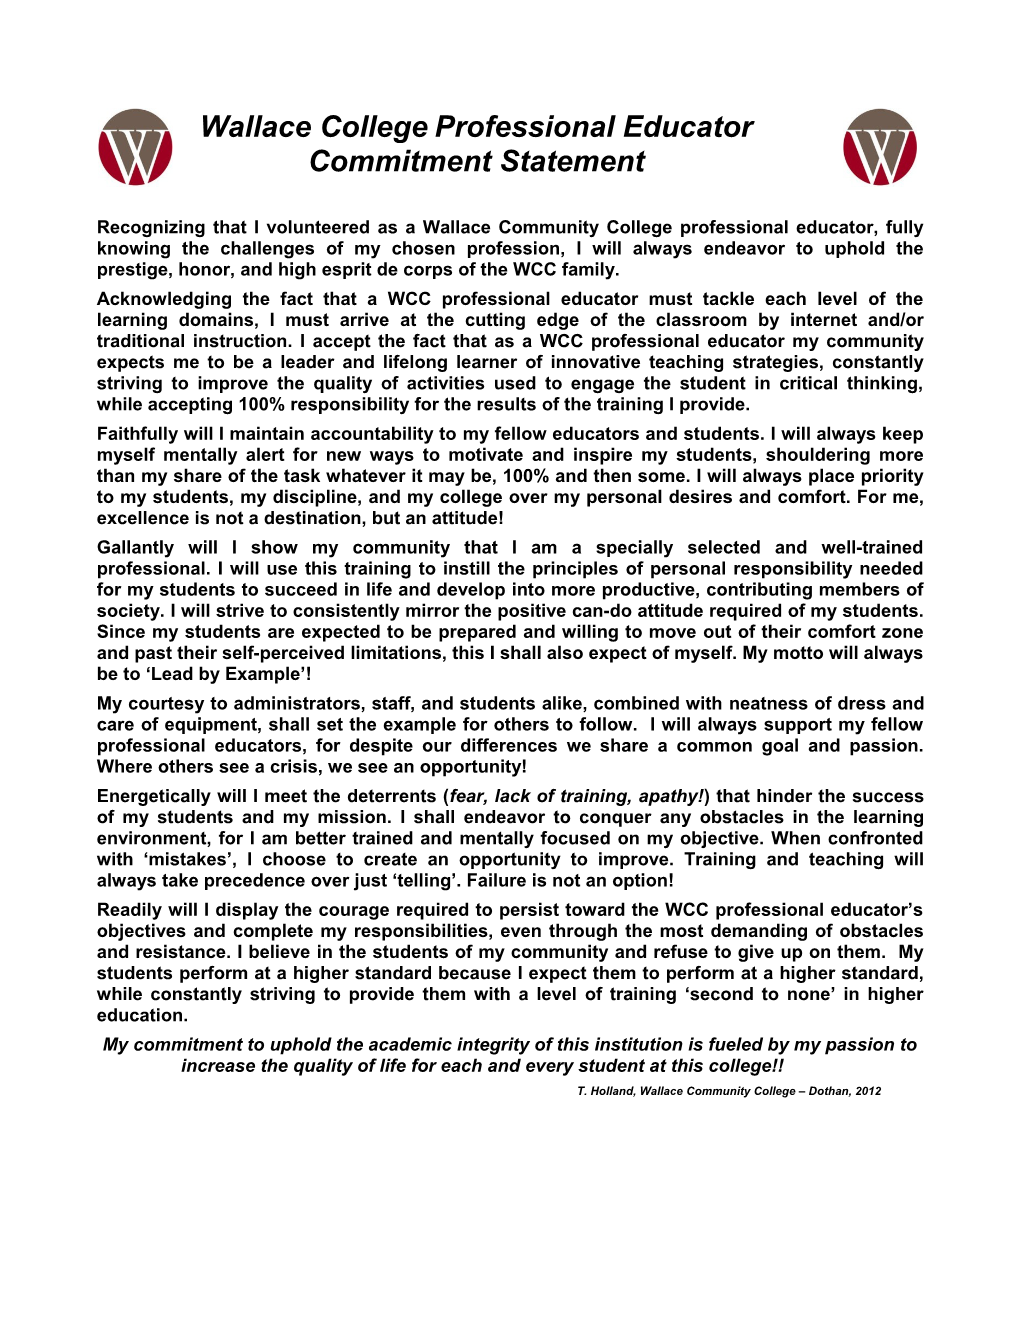 Wallace College Professional Educator Commitment Statement